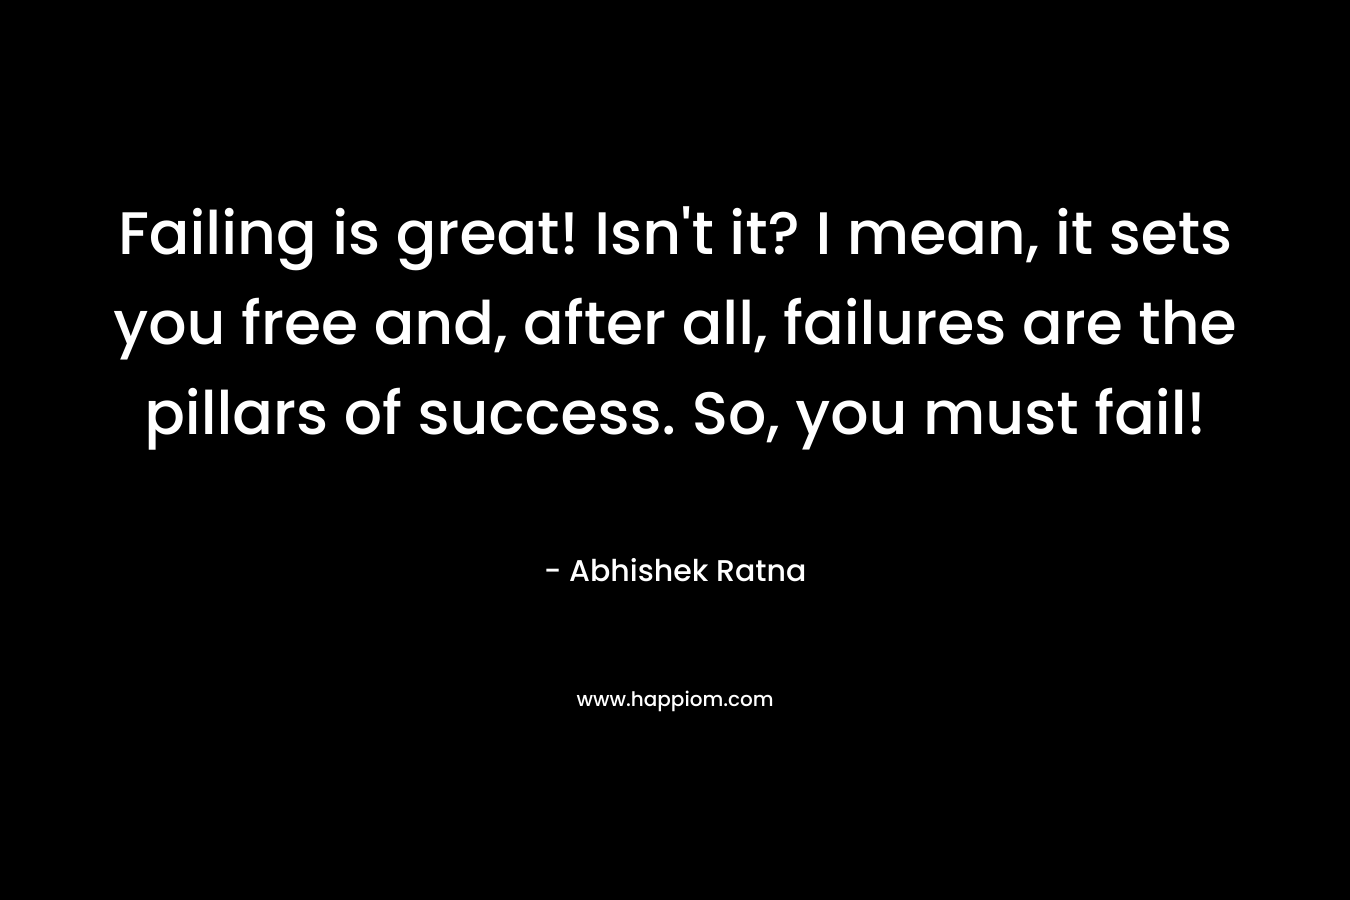 Failing is great! Isn't it? I mean, it sets you free and, after all, failures are the pillars of success. So, you must fail!